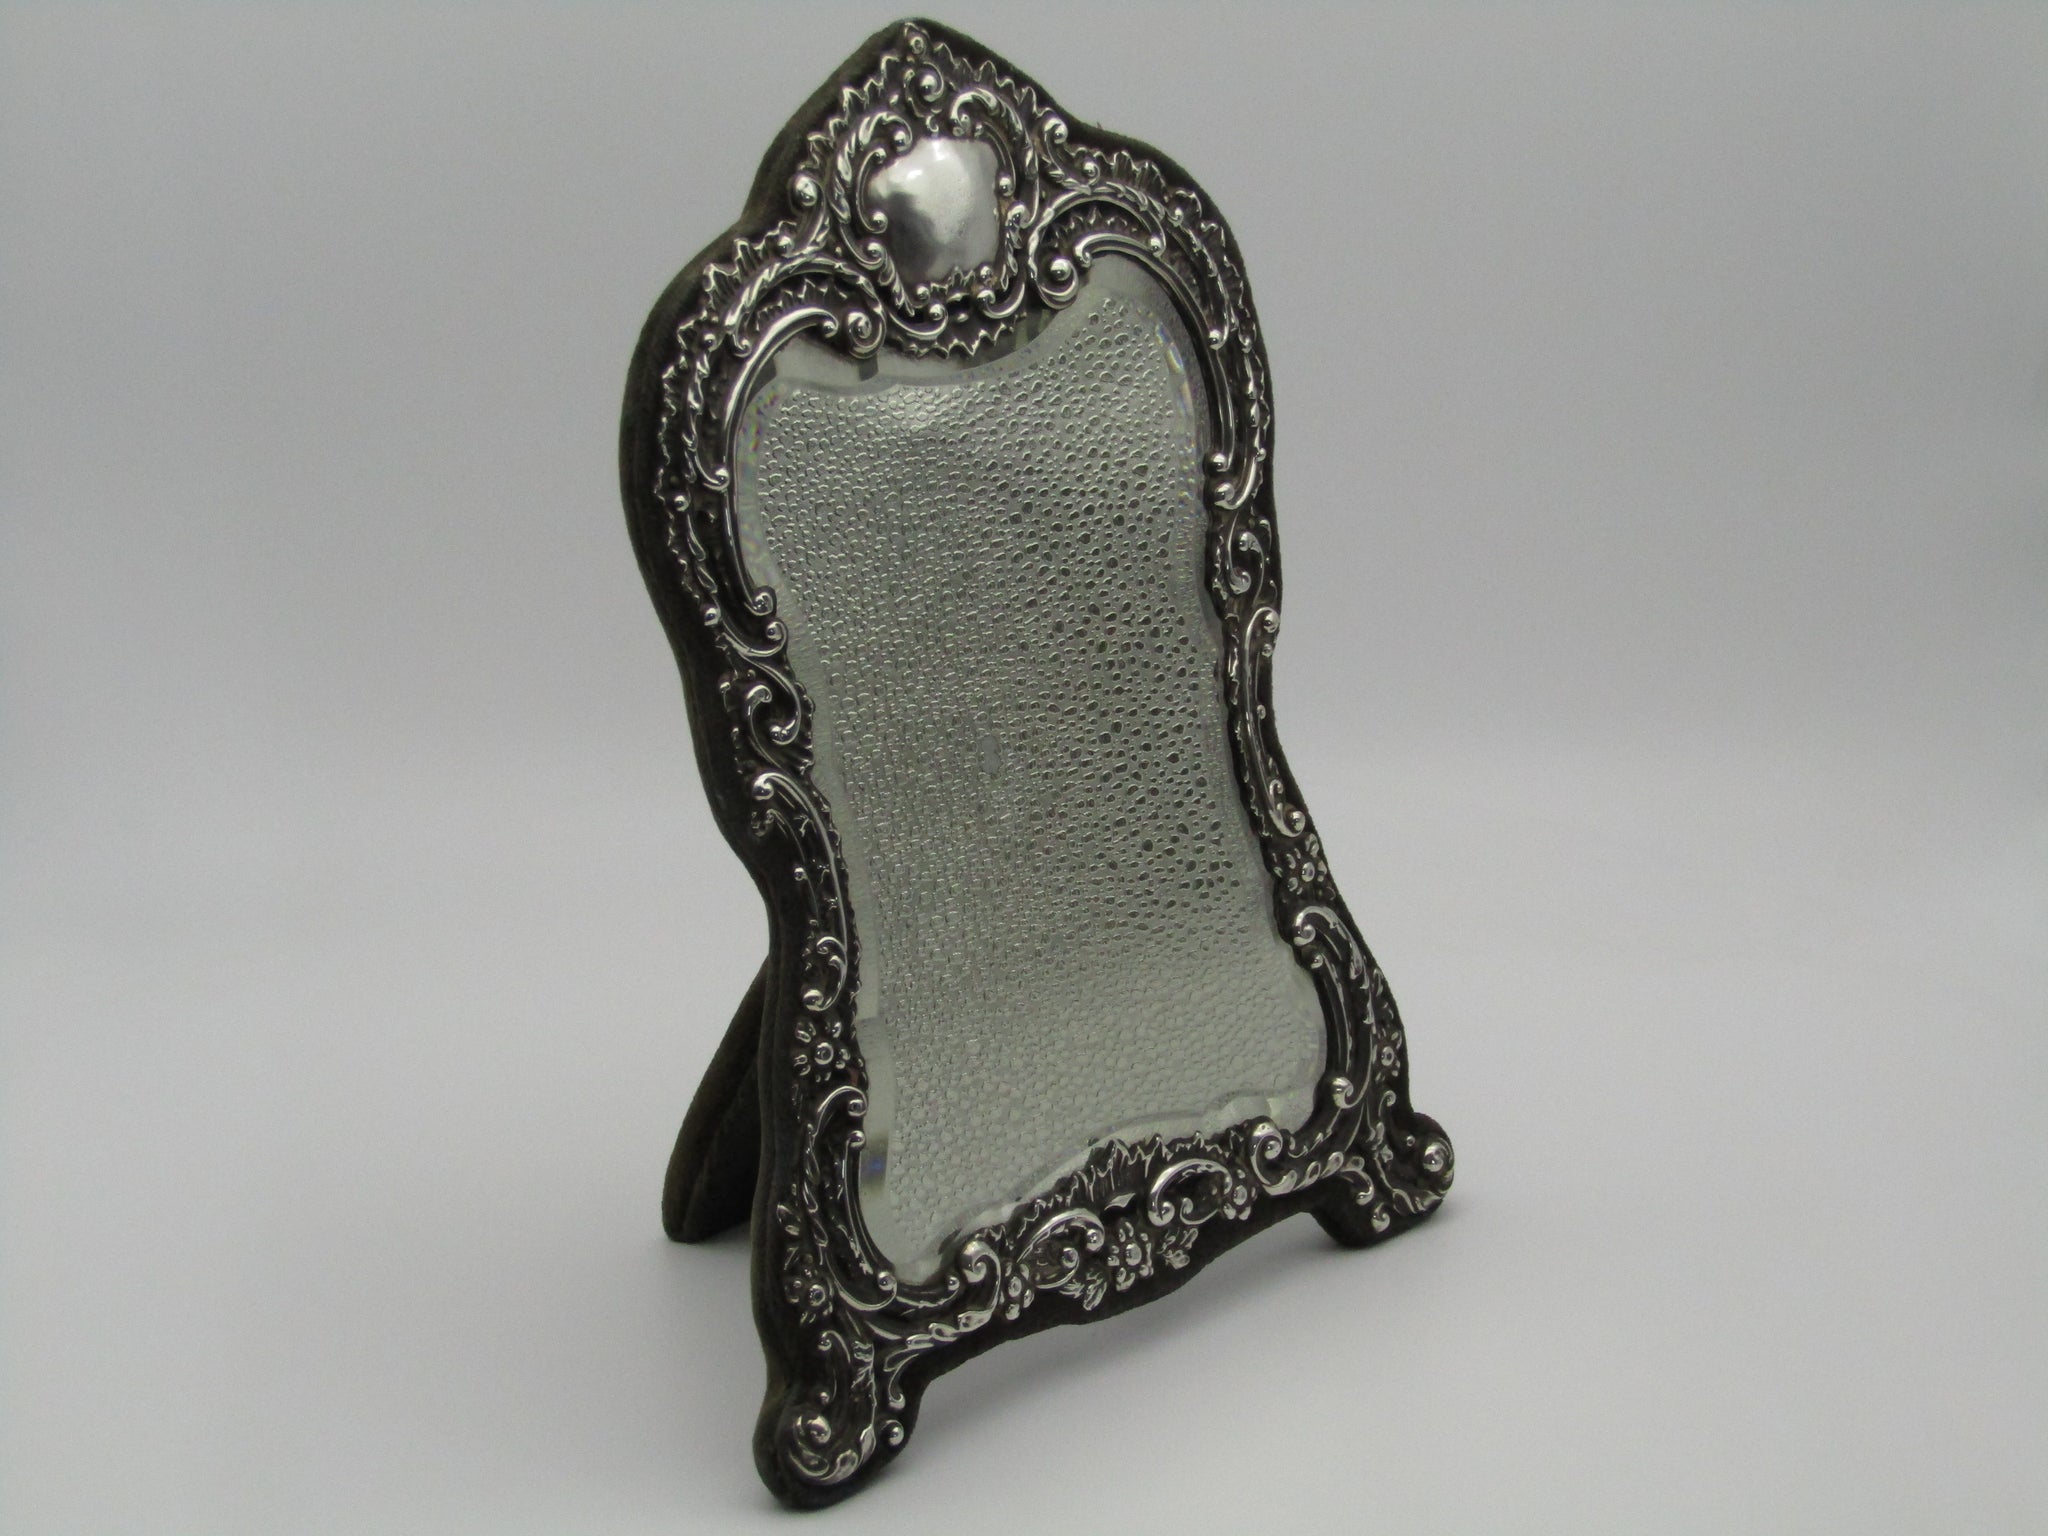 Silver mirror by H. Matthews, made in Birmingham, England, in the year 1902.